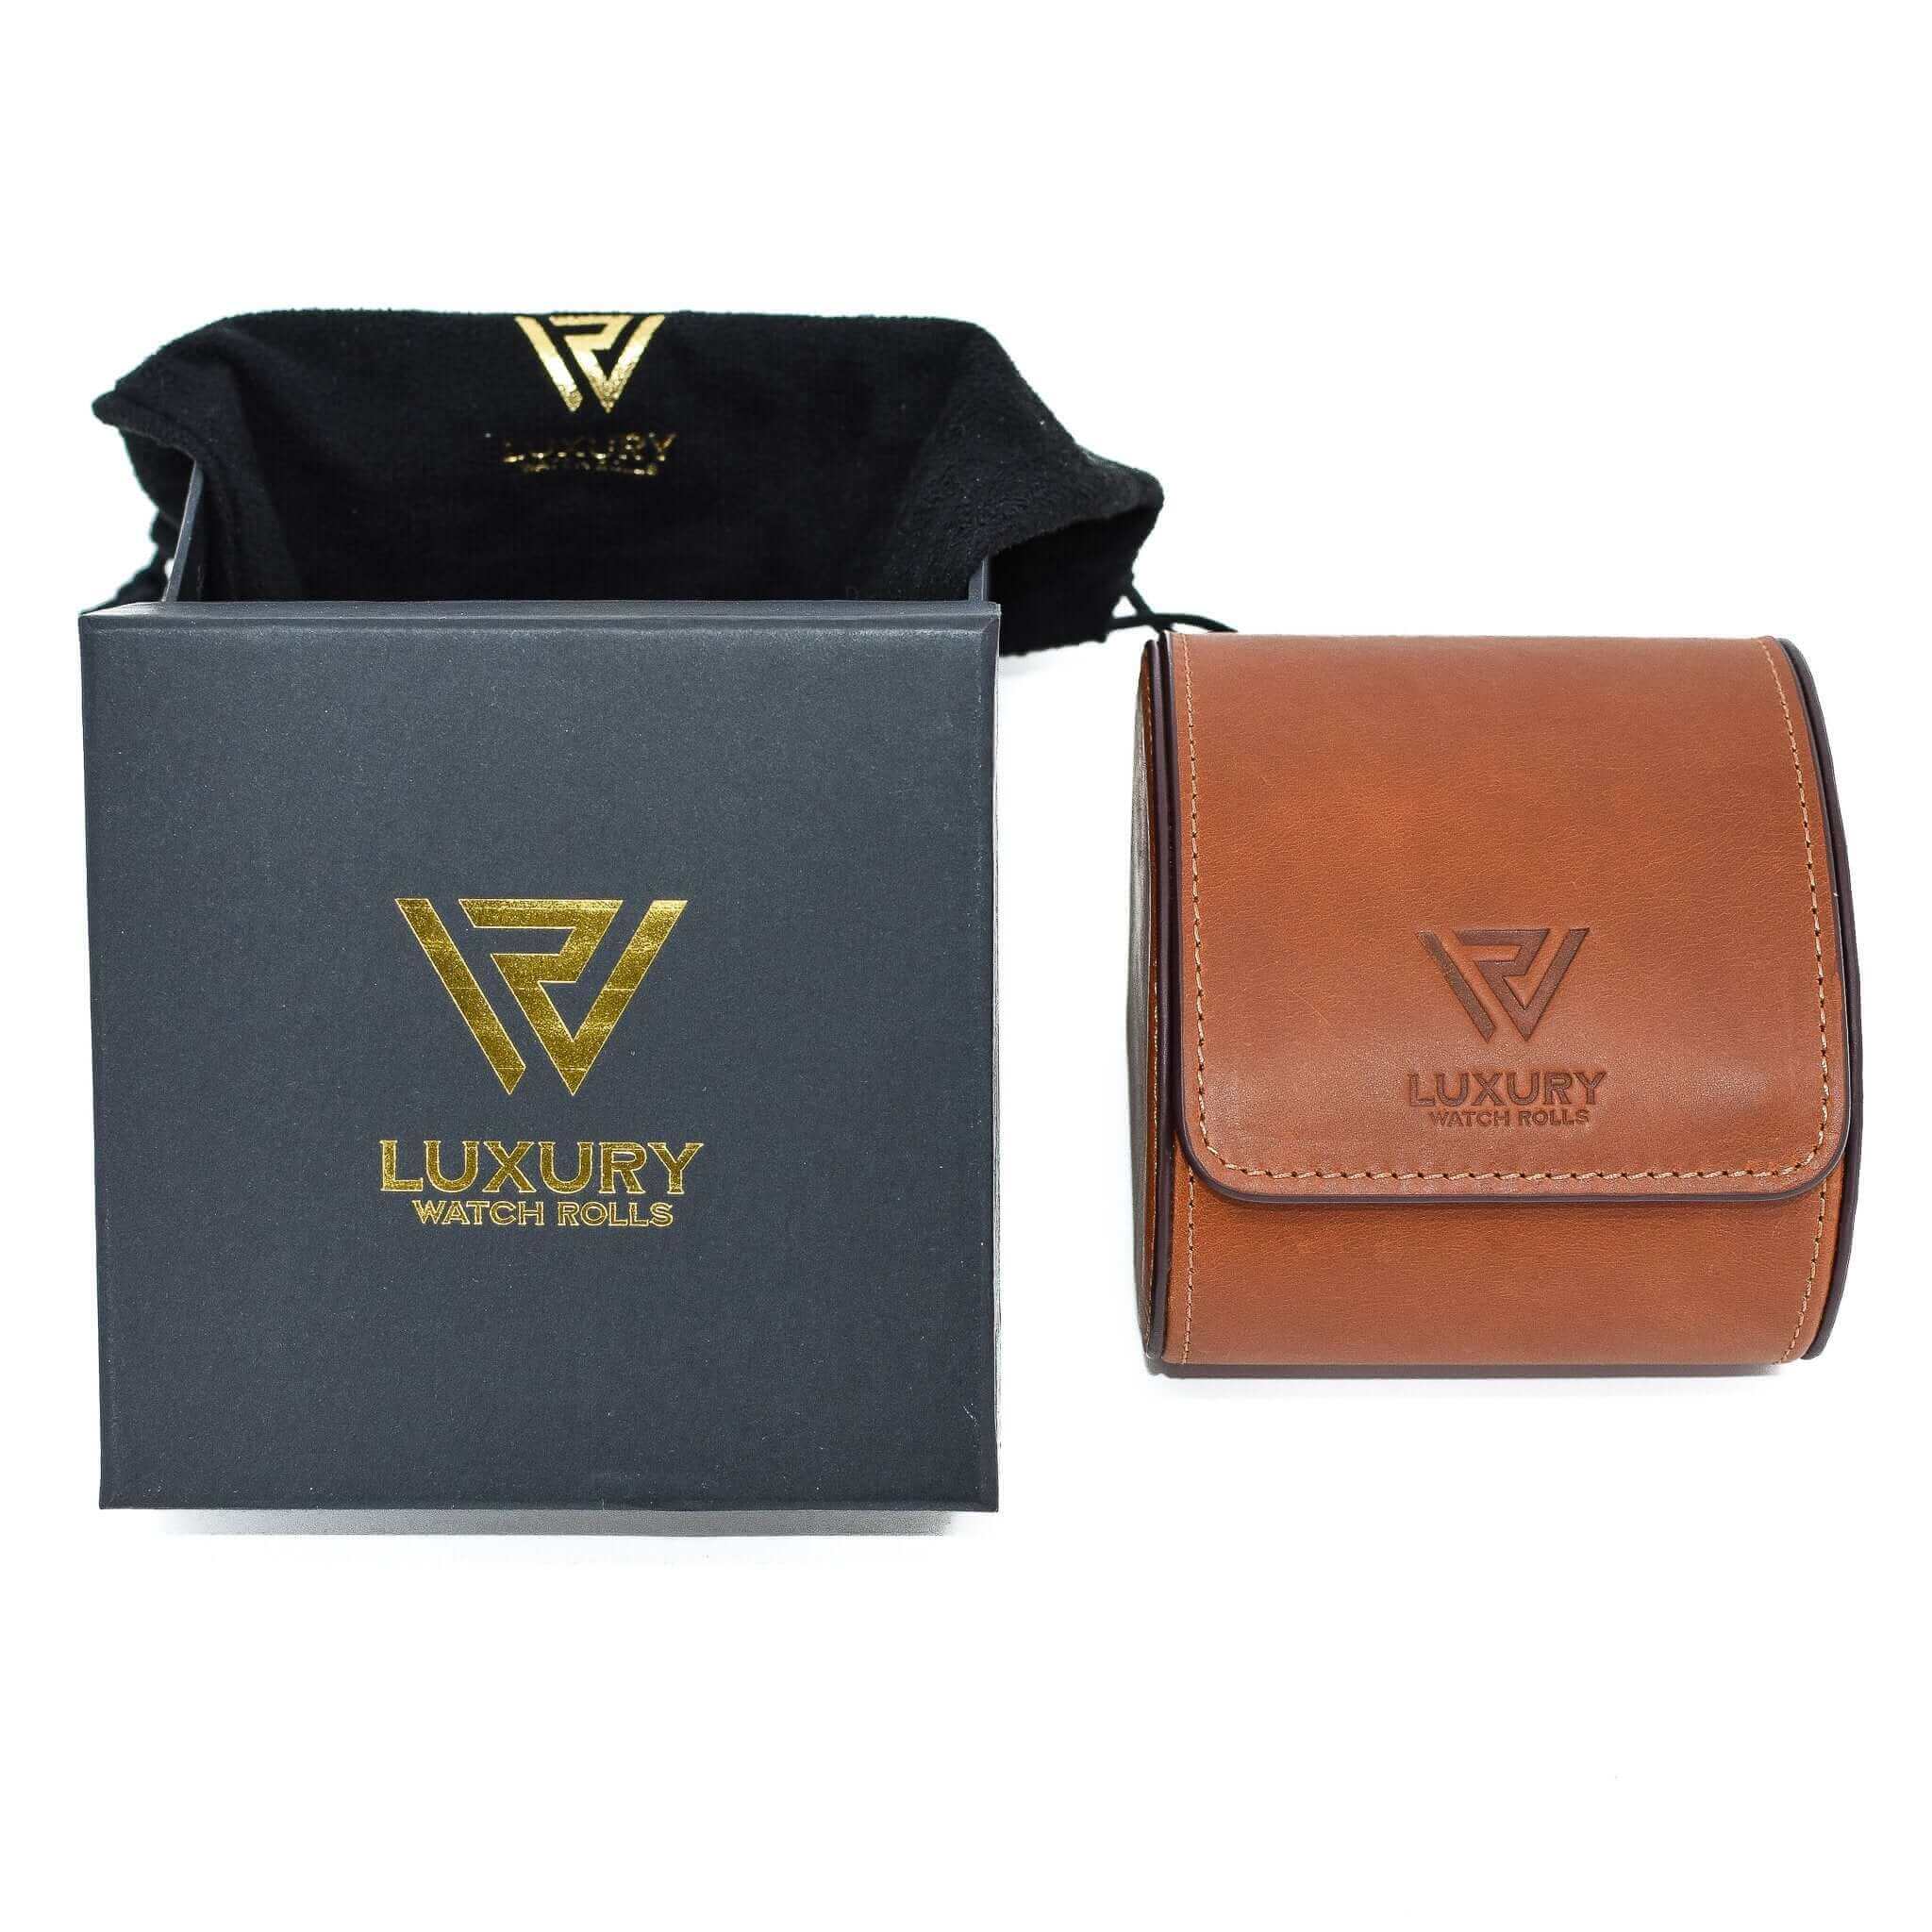 Gift box and velvet bag next to Luxury Watch Roll's single slot, vintage brown leather watch roll for one watch storage.